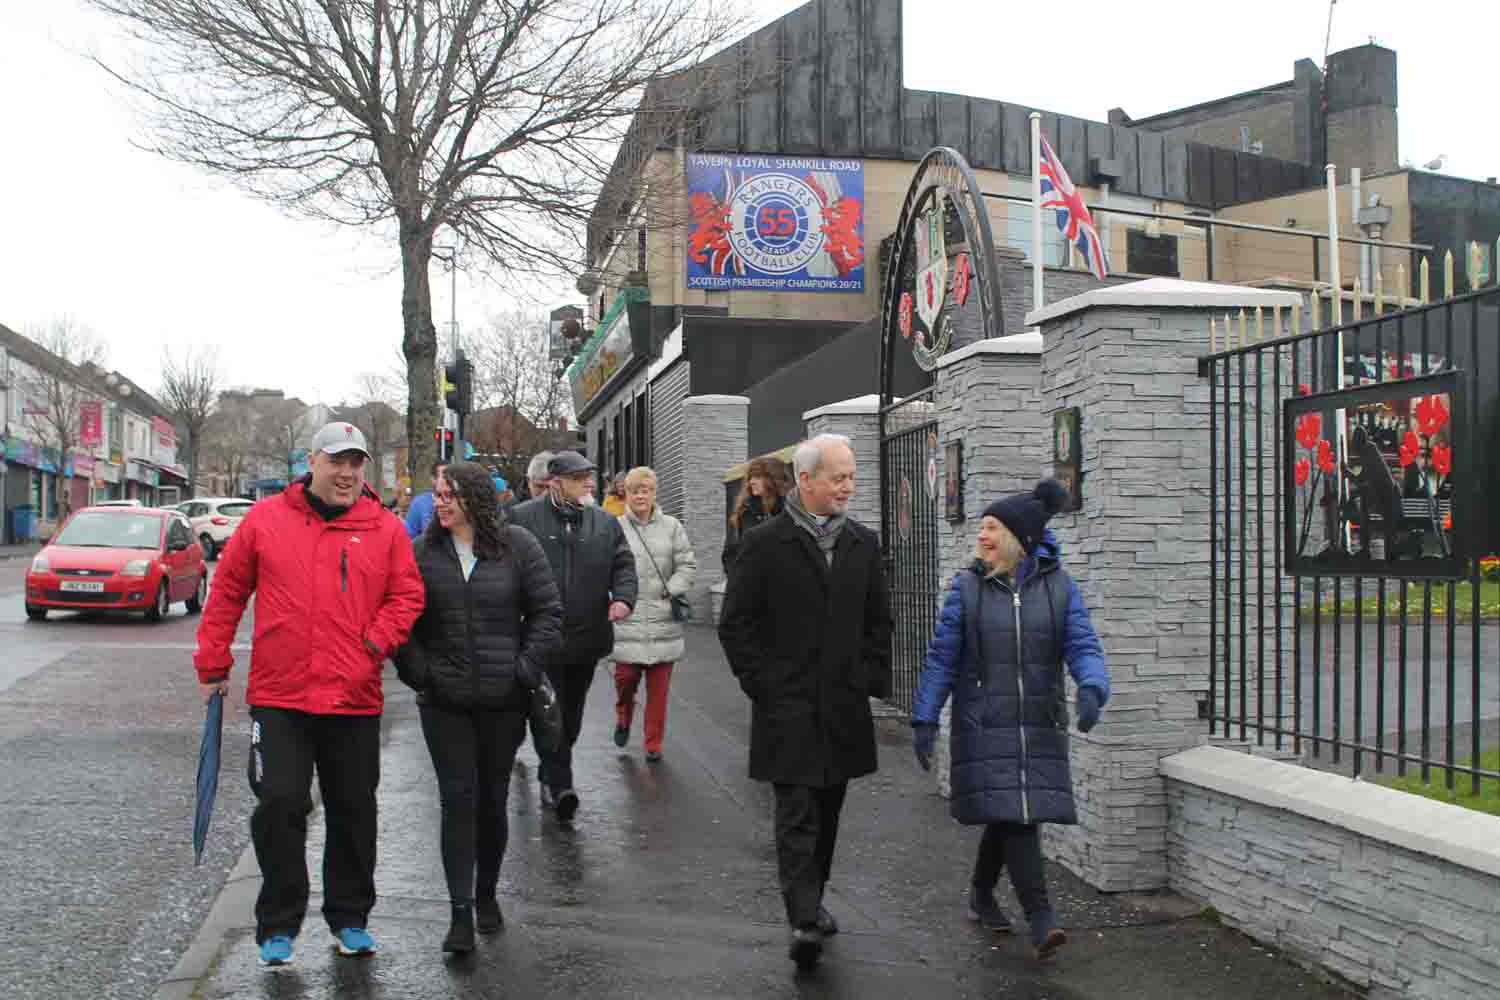 The Rev Tracey McRoberts, right, leads a prayer walk along Belfast's Shankill Road on April 8.